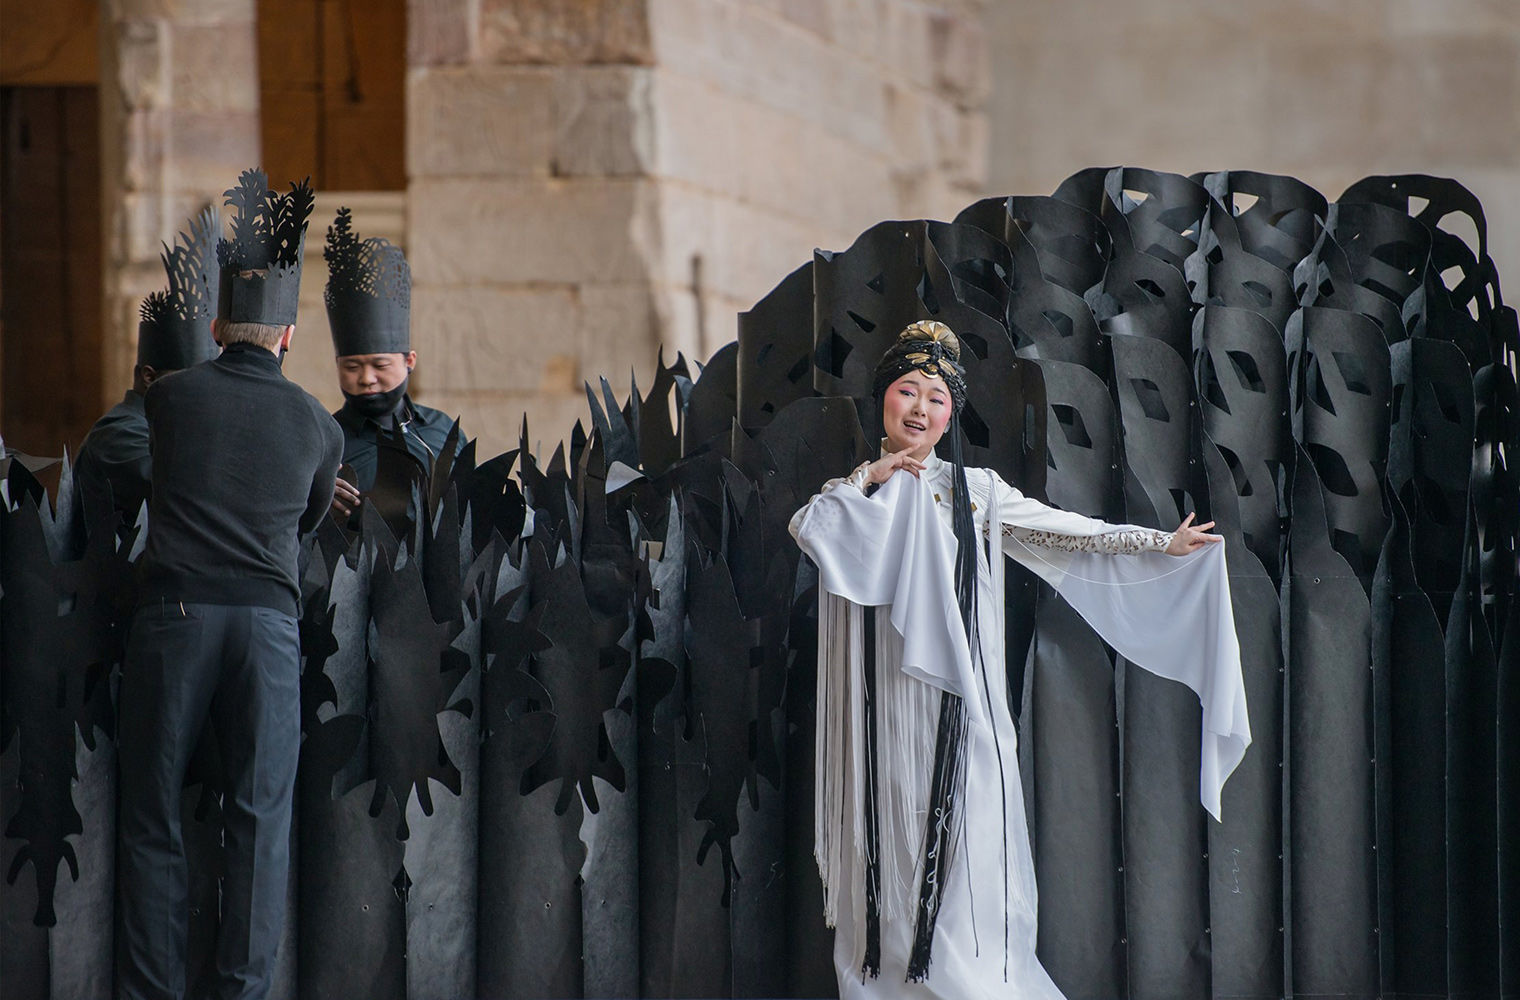 Paradise Interrupted, a poetic weaving of the Western myth of the Garden of Eden and the Chinese myth of the Peony Pavilion, performed outside of the Temple of Dendur, March 2015. An asian woman wearing a costume performing in front of a spiked black structure being held up by three men dressed in black. 